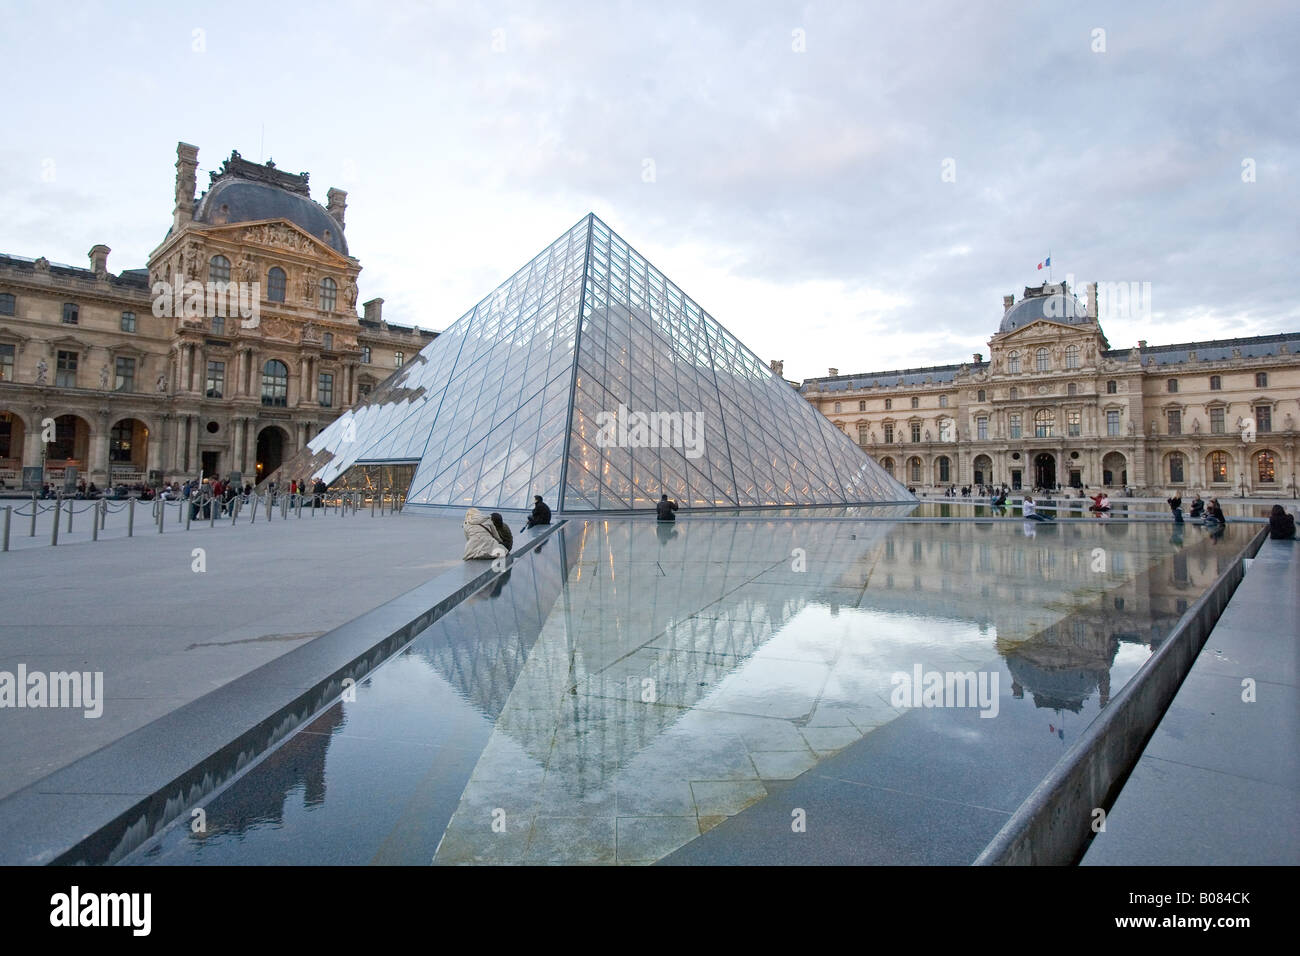 Museum du Louvre and the glass pyramid Paris France Stock Photo